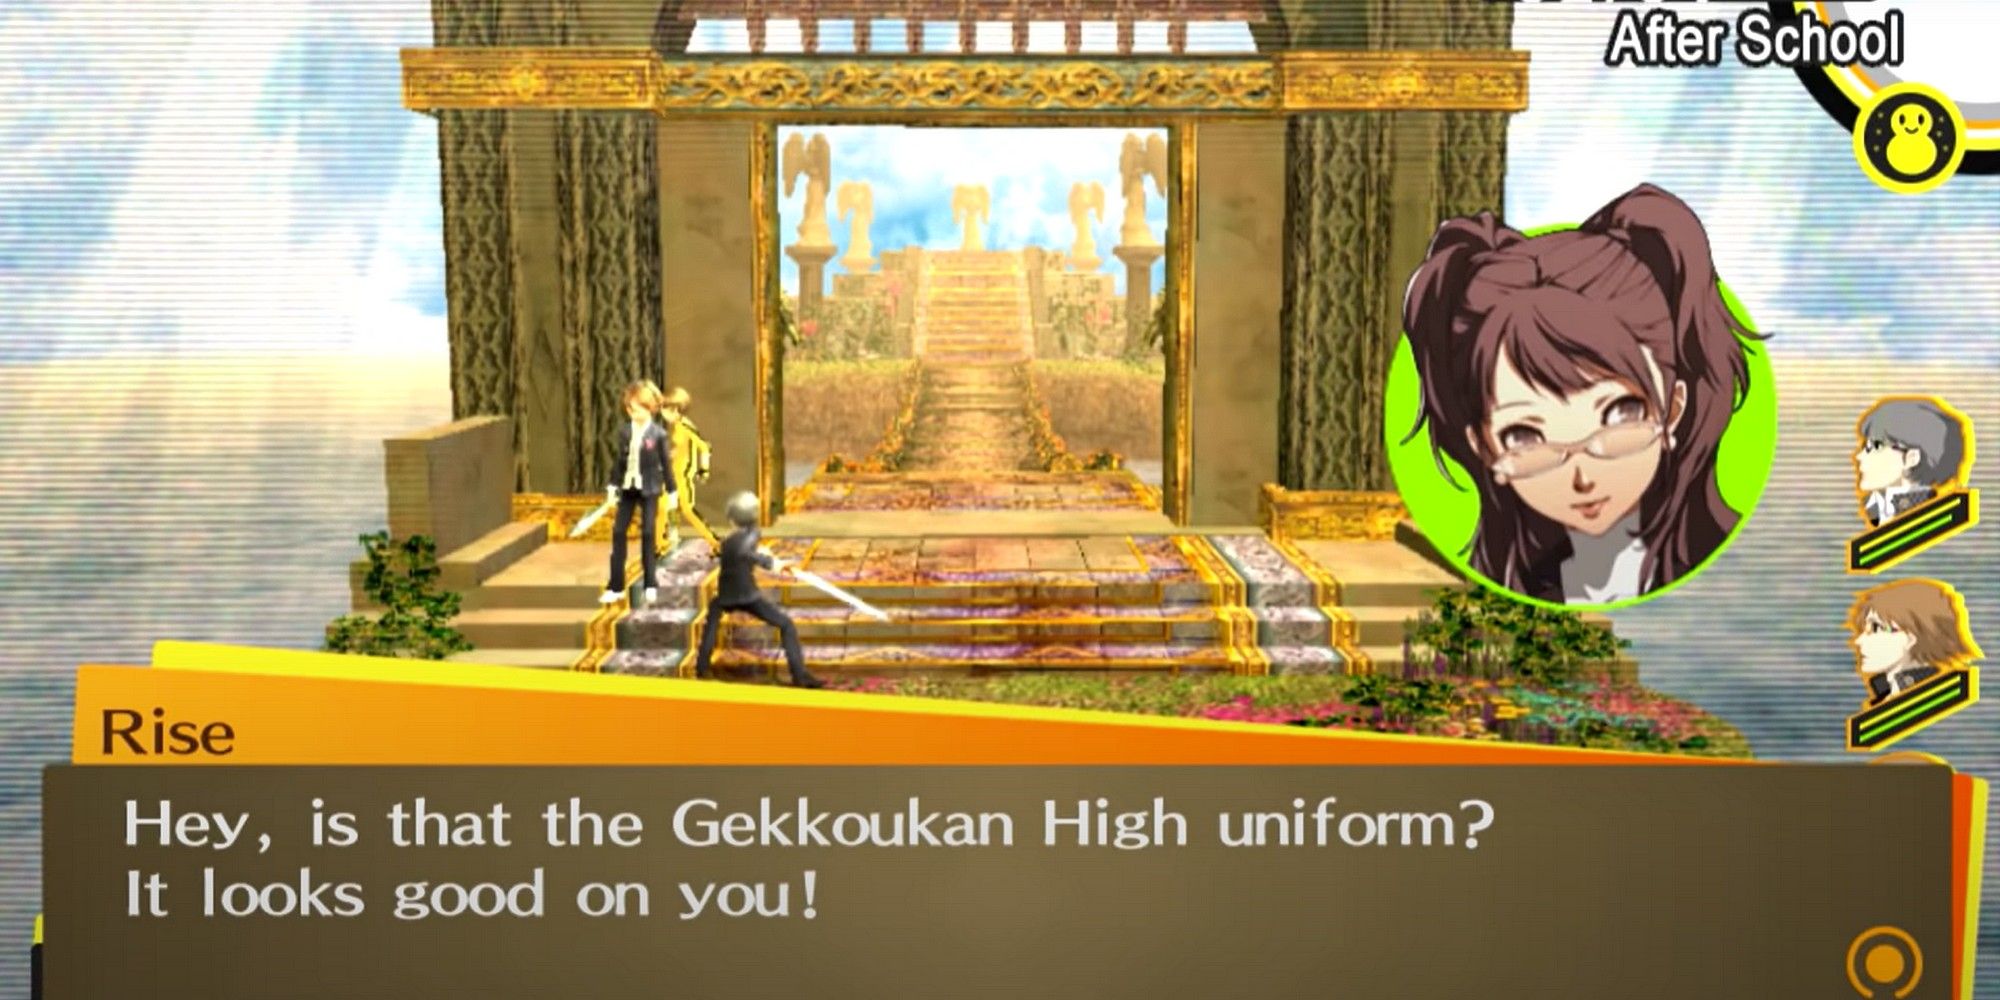 Rise reacting to Yu's outfit from Gekkoukan High in Persona 4 Golden